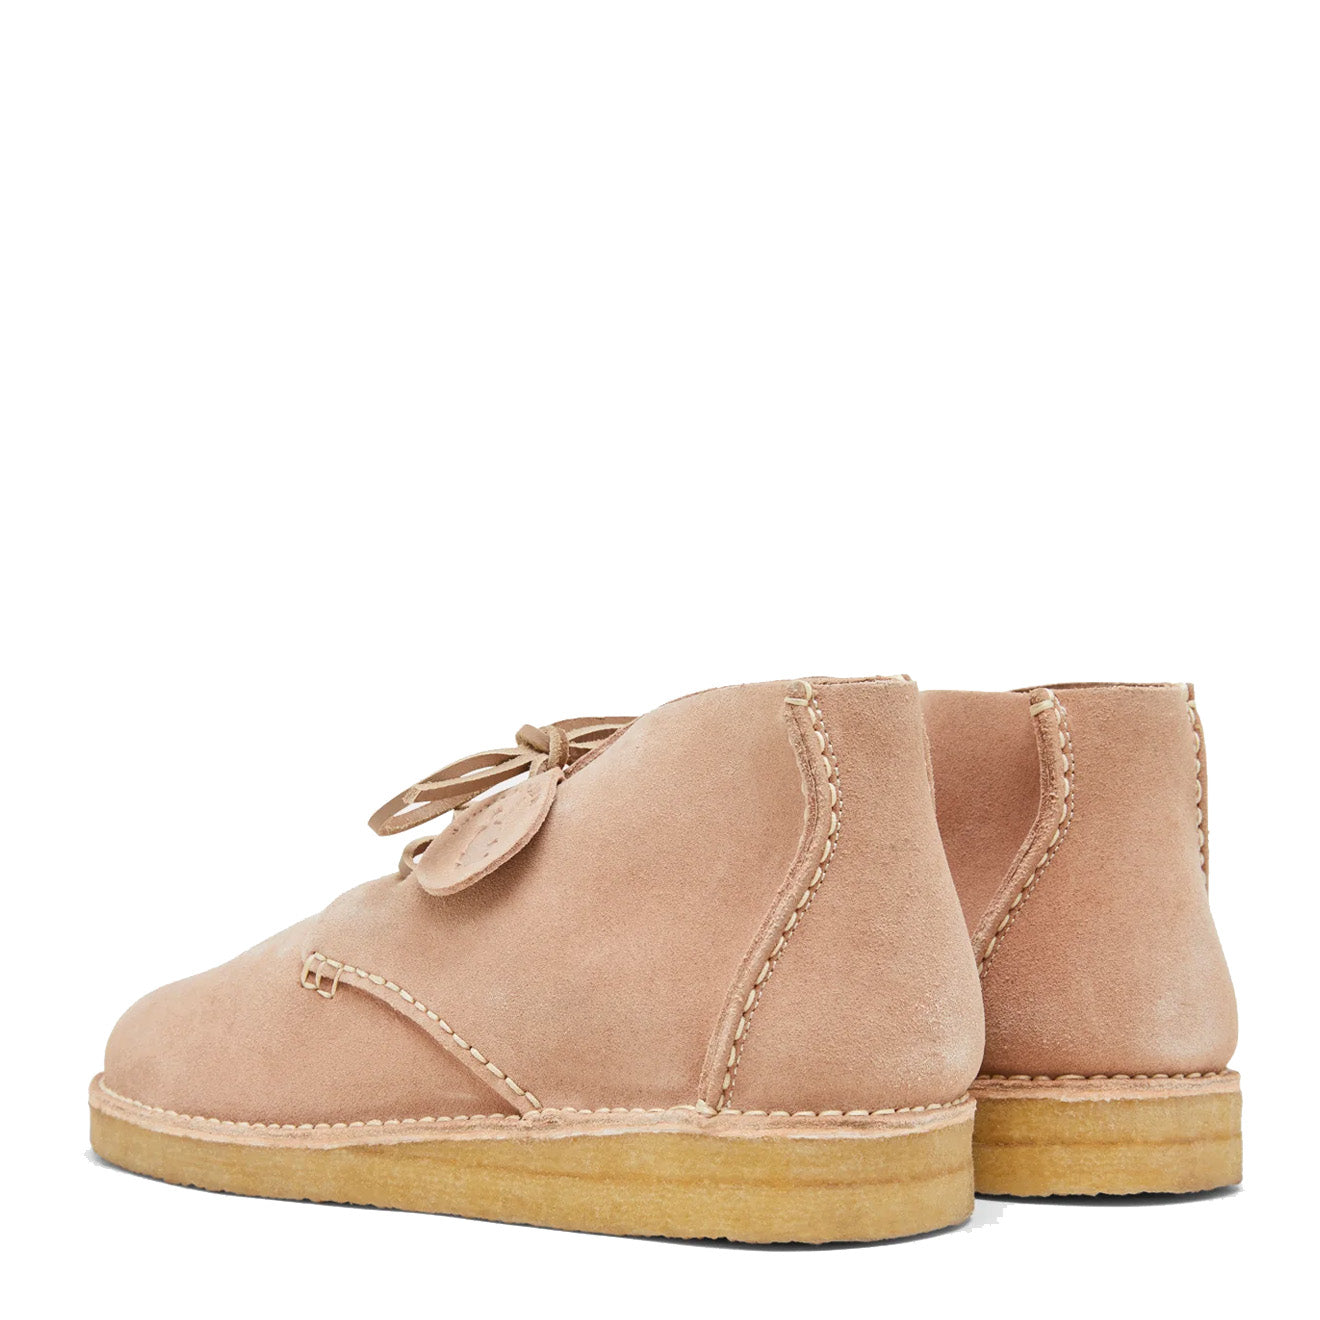 Johnny Marr Rishi Suede Boot Nude Pink